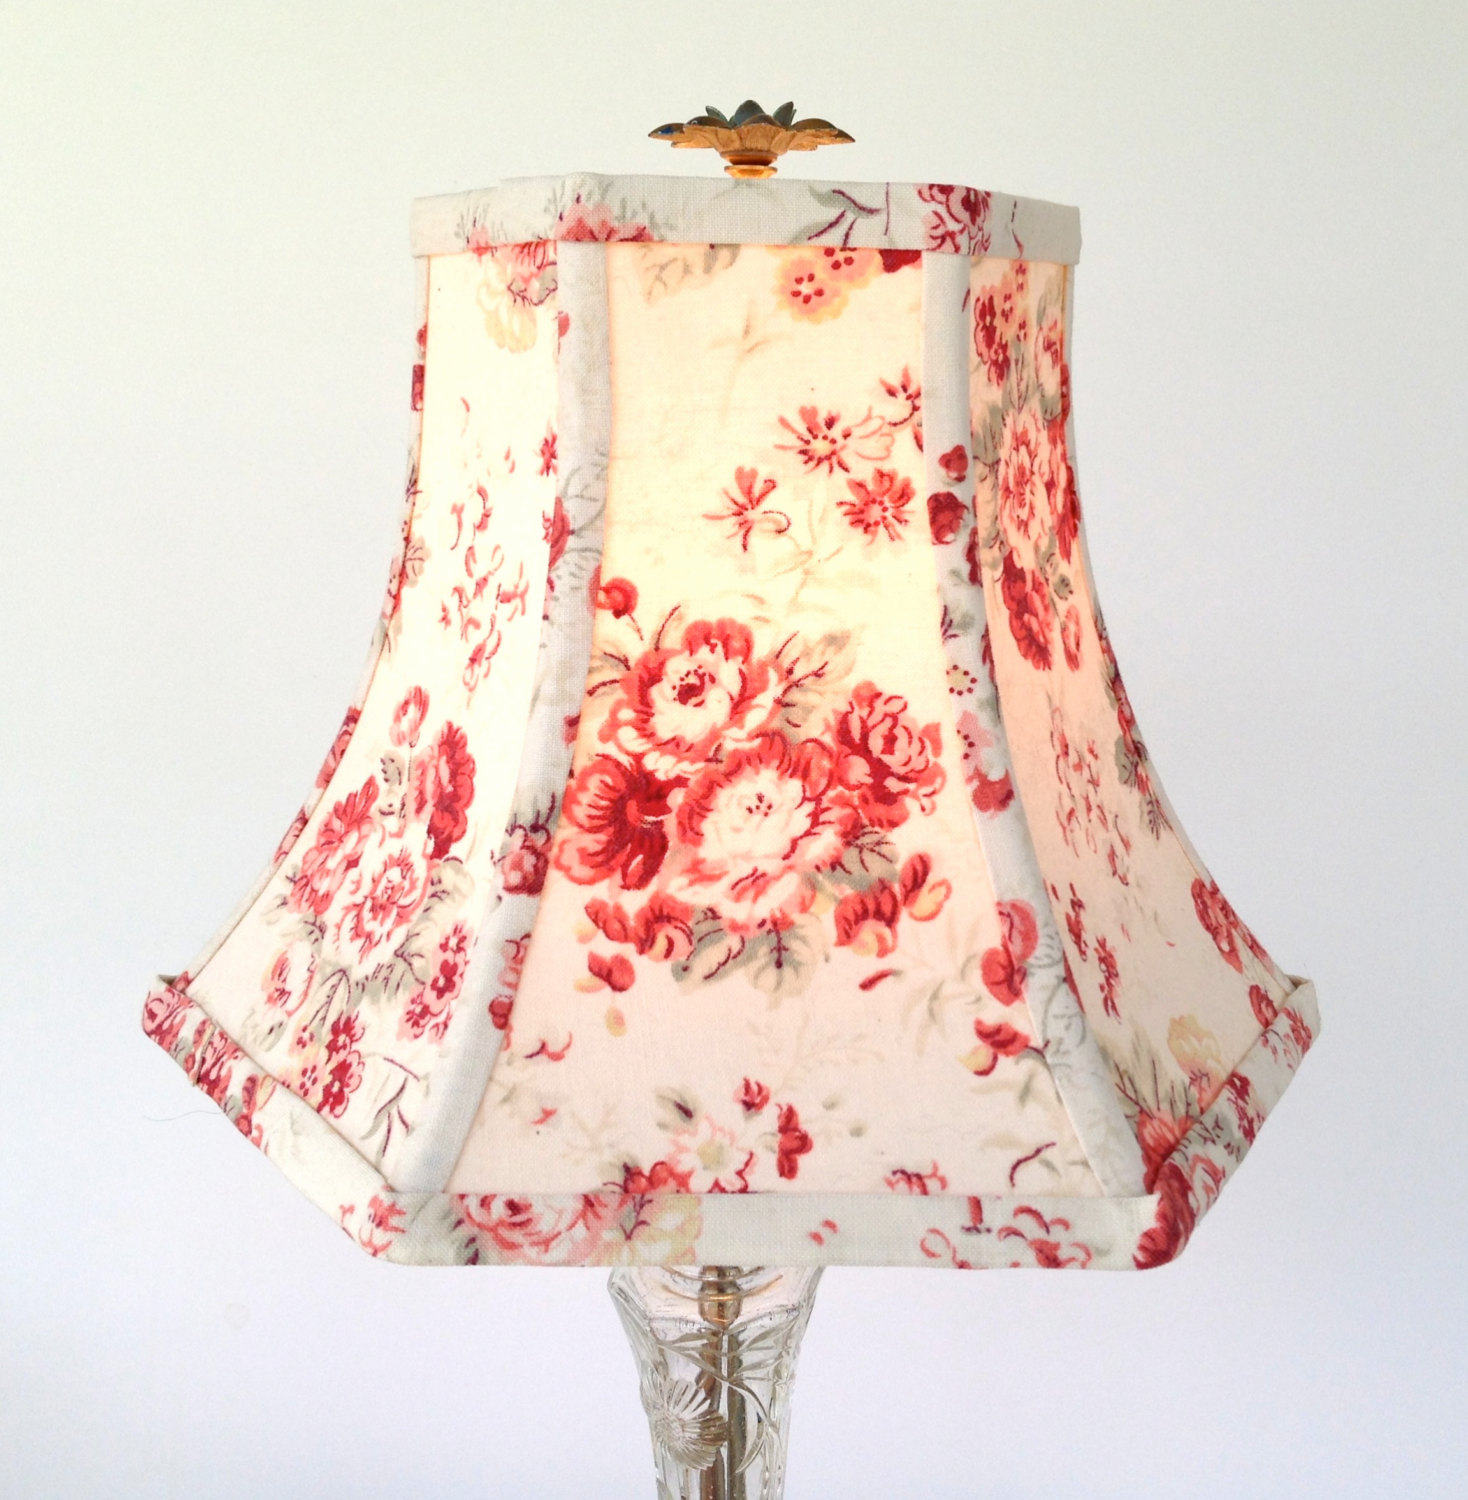 50 Shabby Chic Lamp Shades You Ll Love In 2020 Visual Hunt